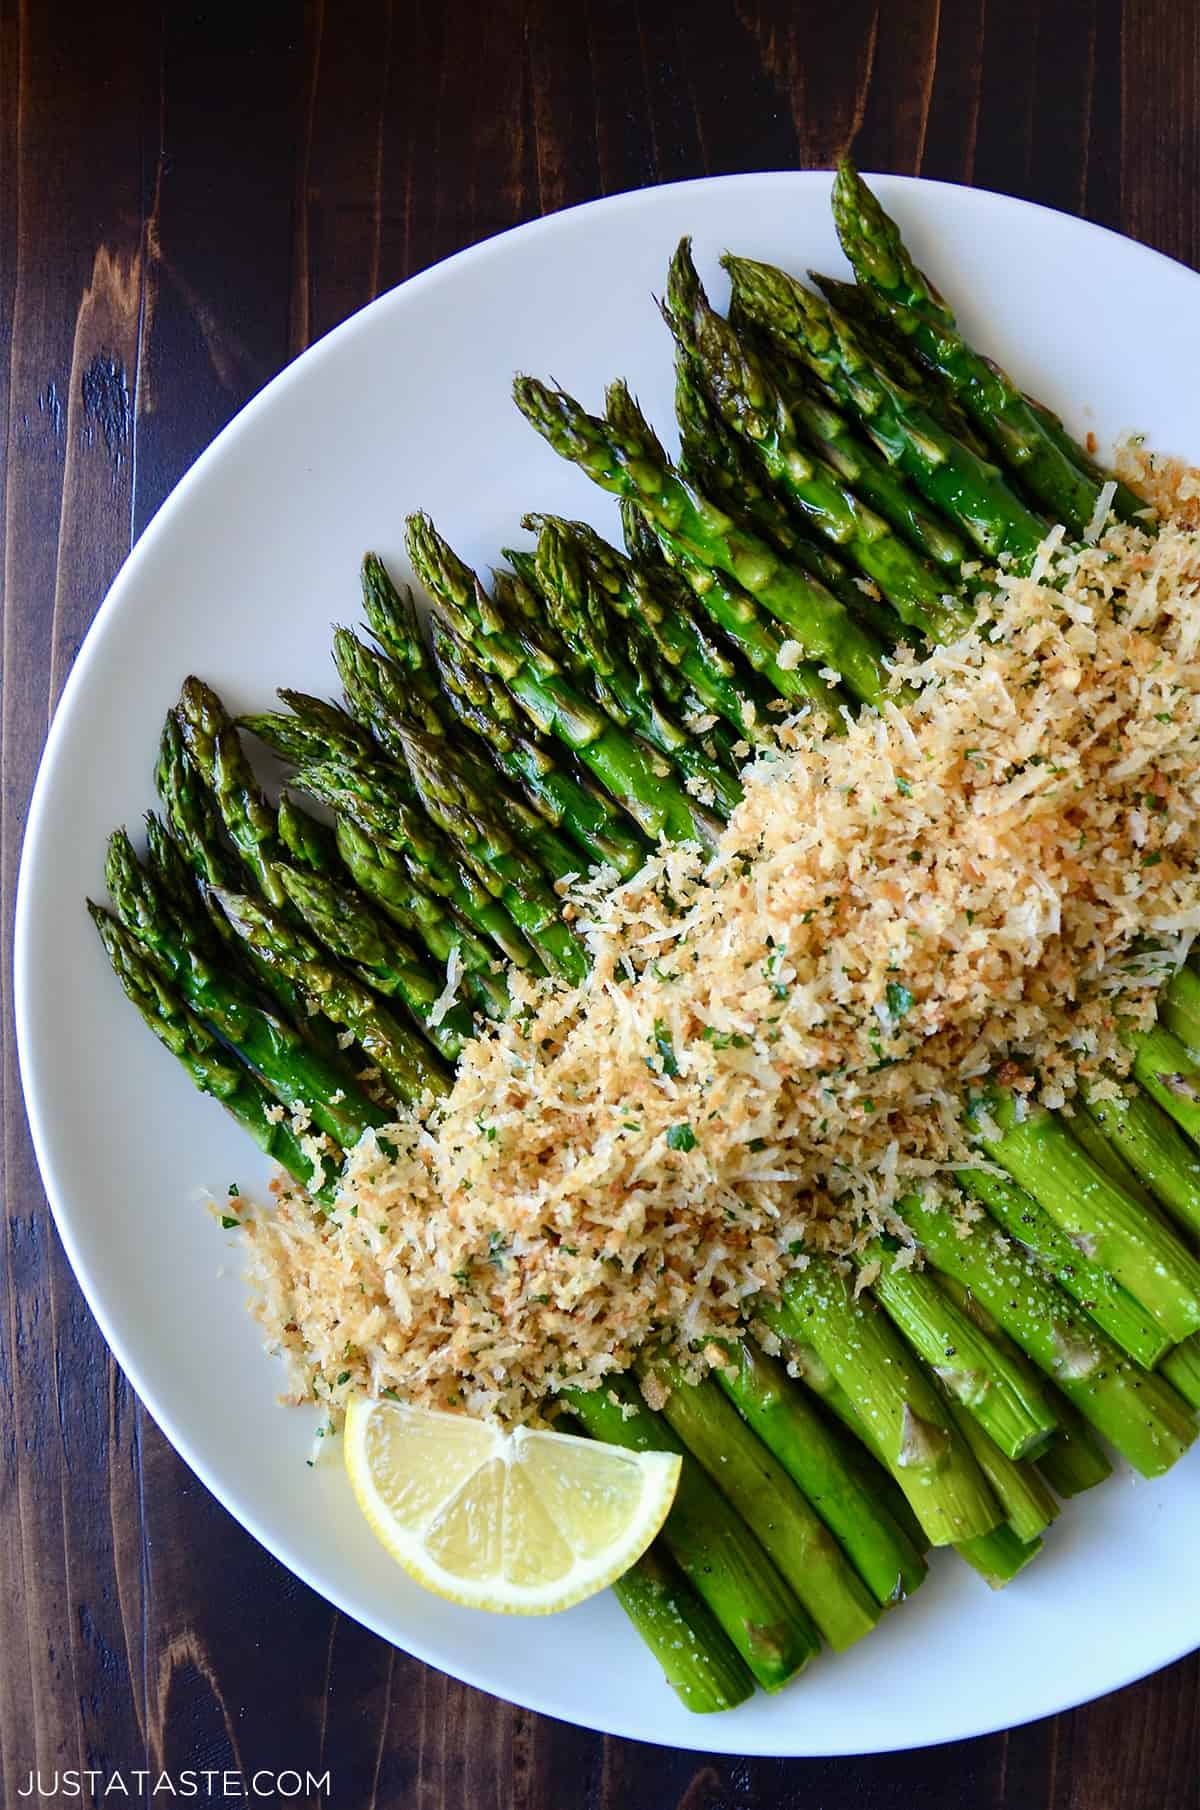 Roasted asparagus topped with cheesy, herby breadcrumbs on a white serving plate.